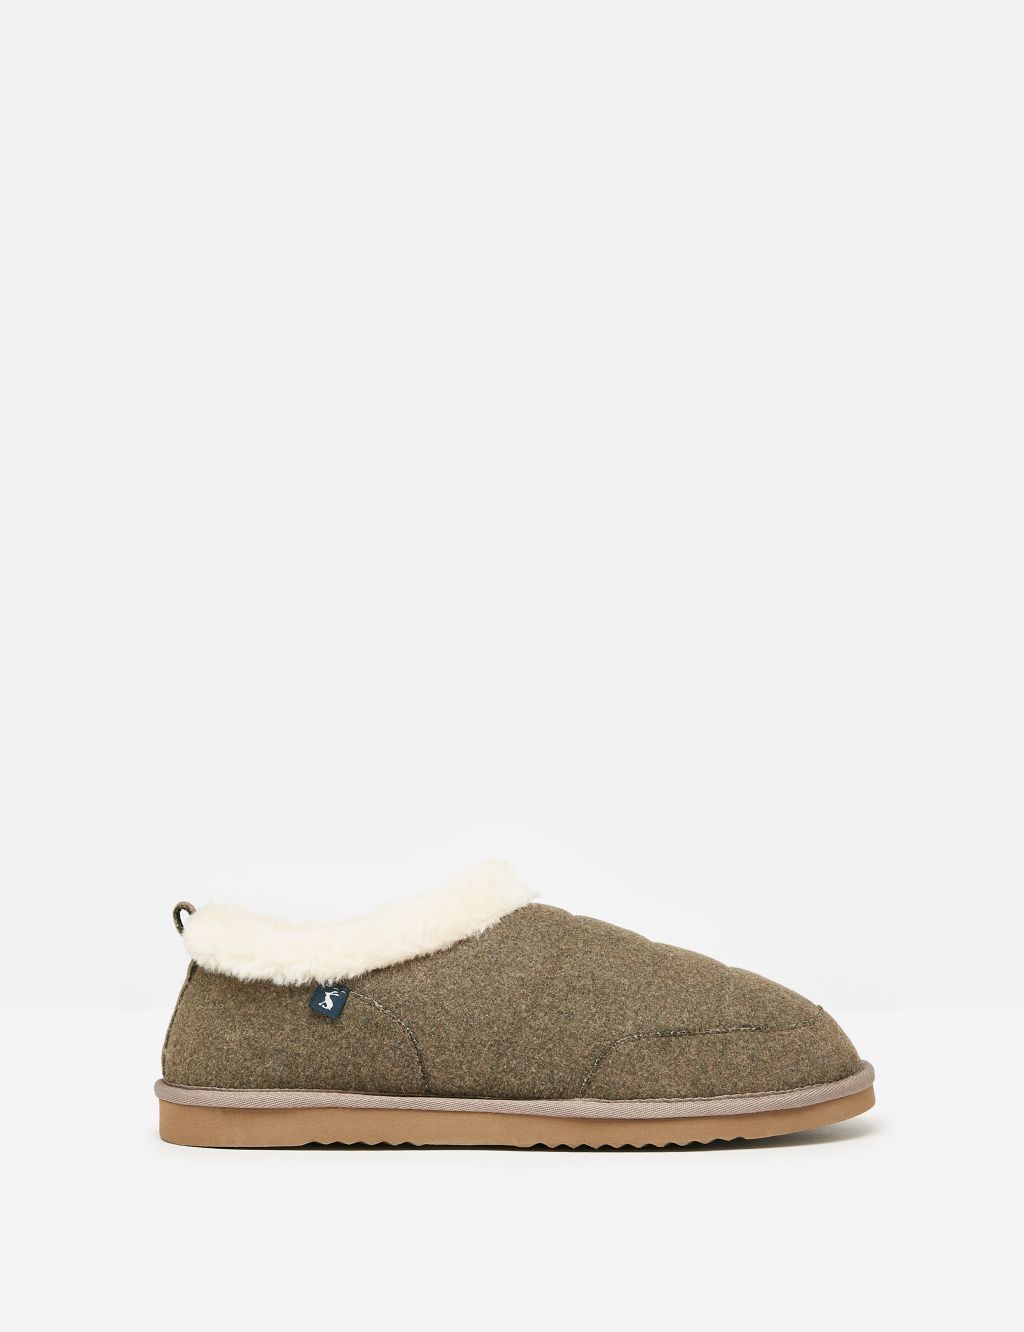 Faux Fur Lined Mule Slippers image 1